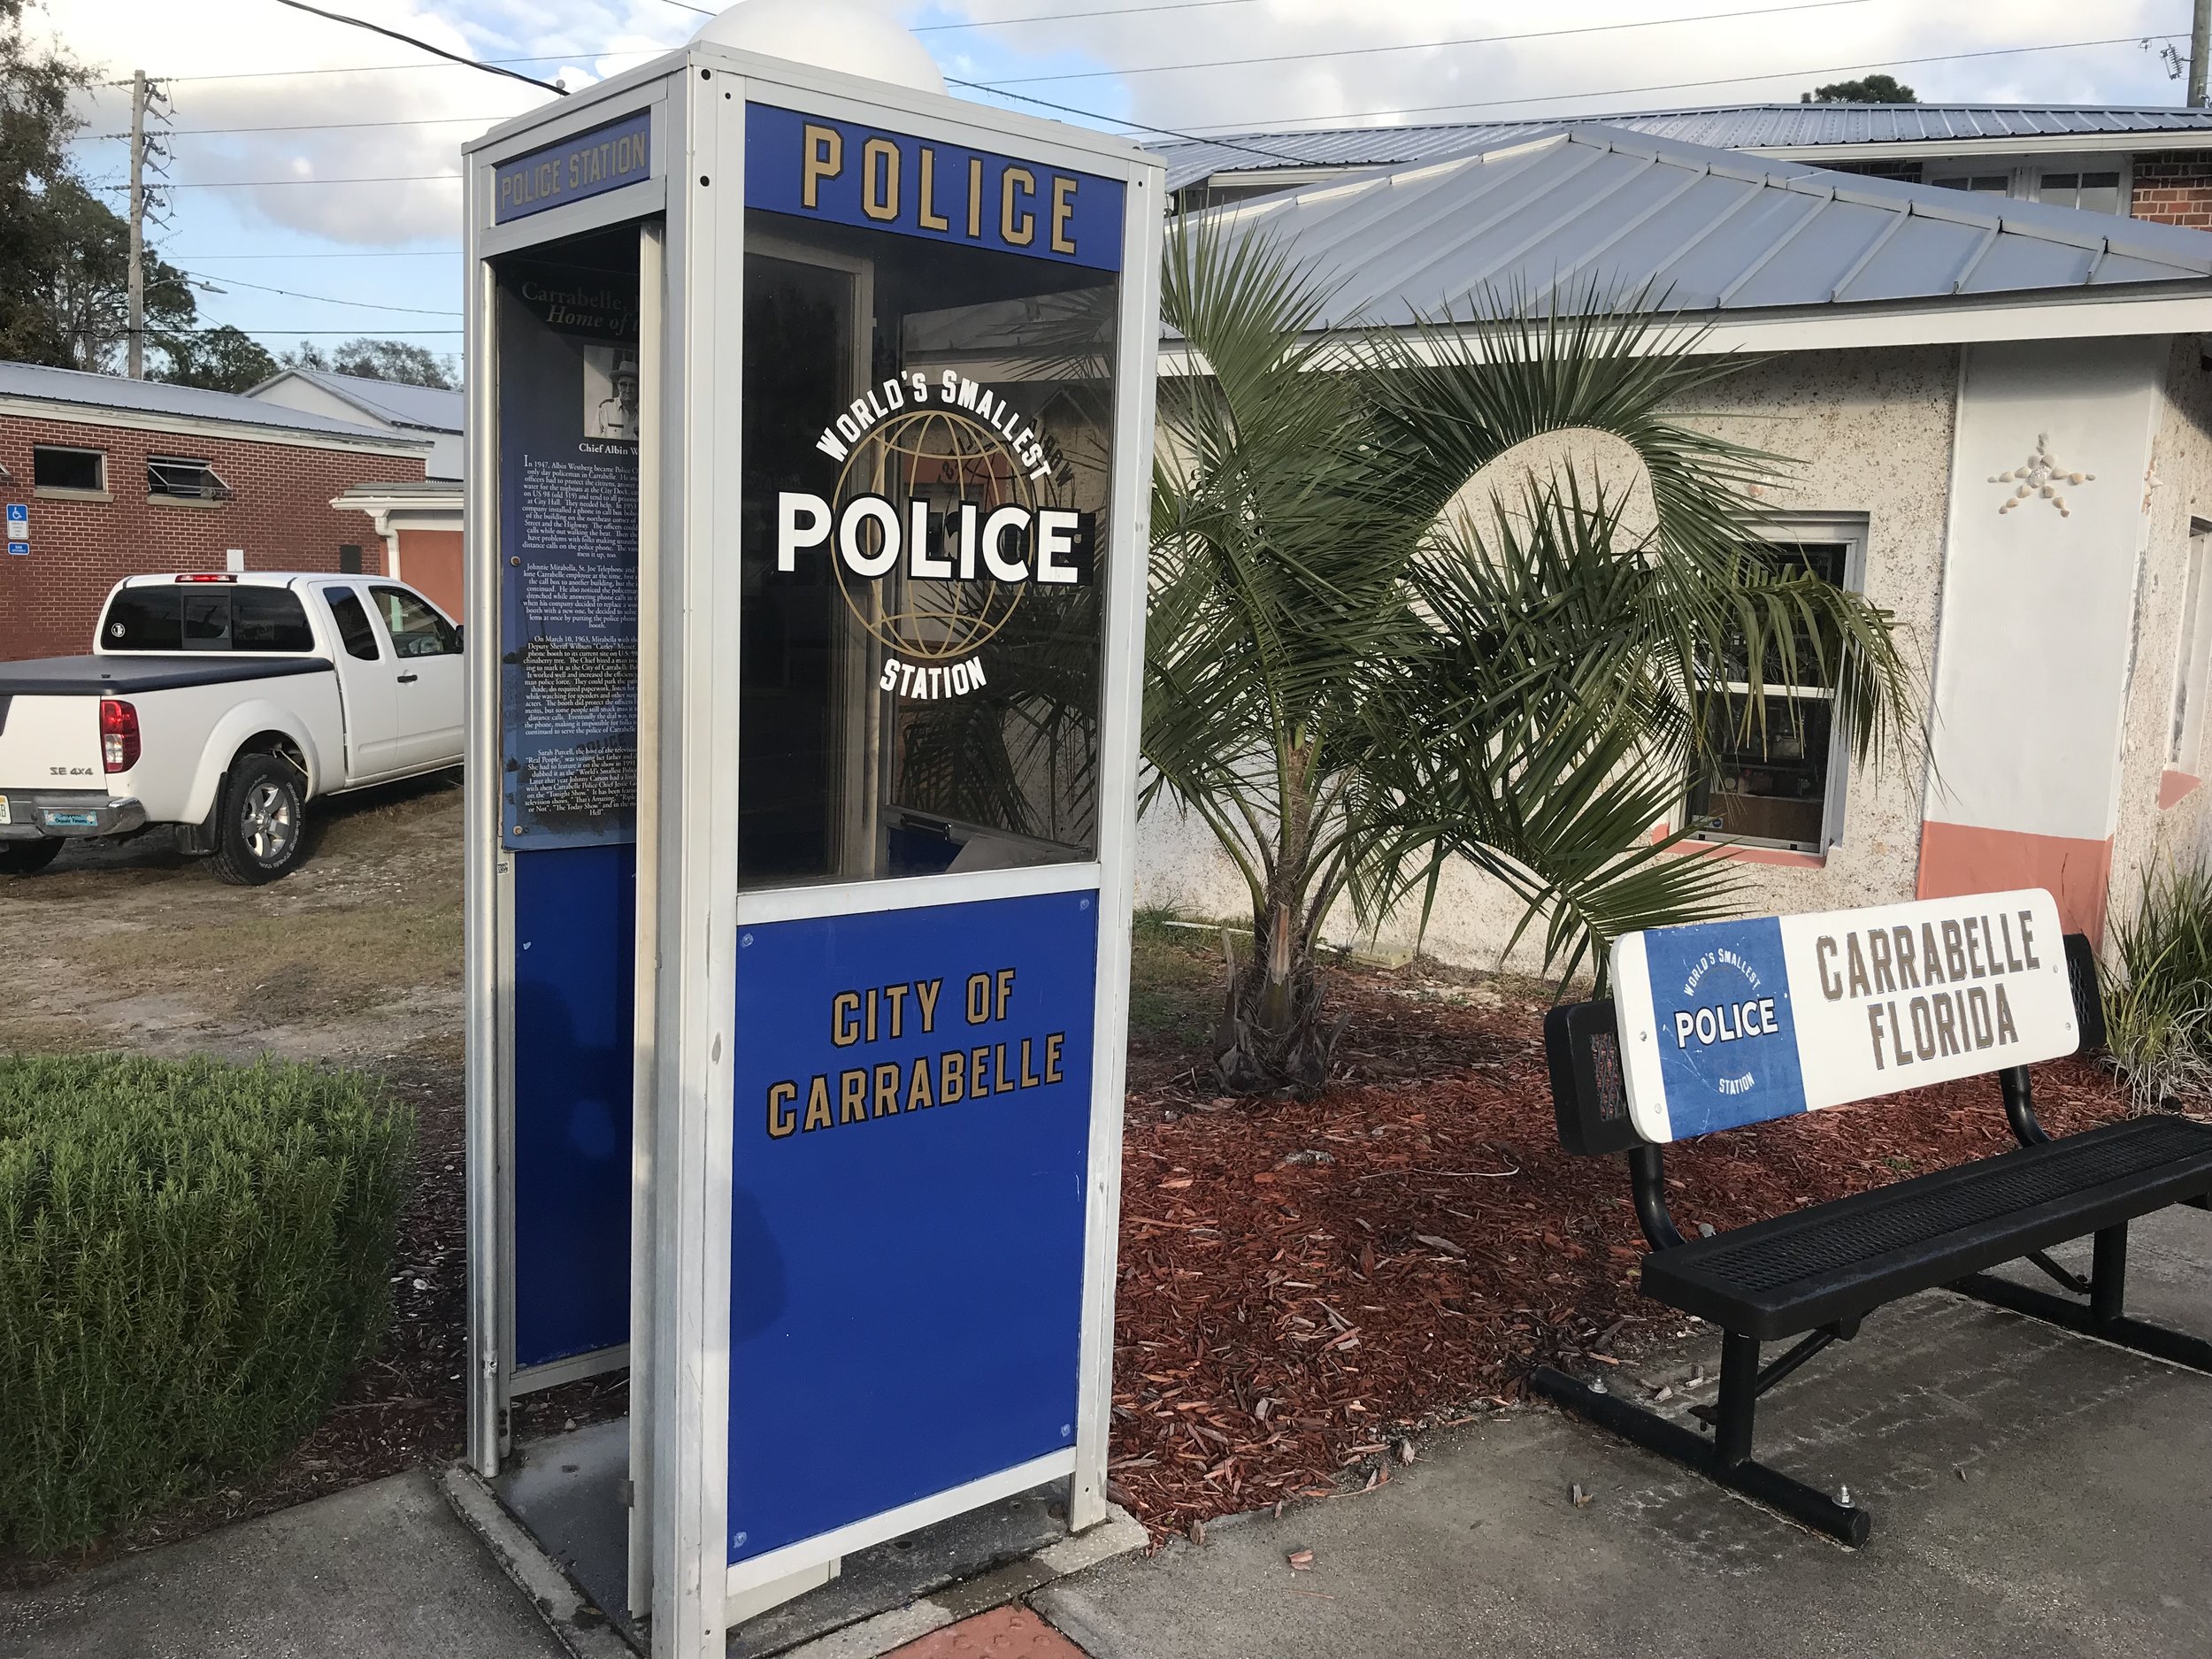  The story of the police station in Carrabelle, Fla., located at the town’s busiest intersection, sounds like an episode of “Mayberry RFD.”      